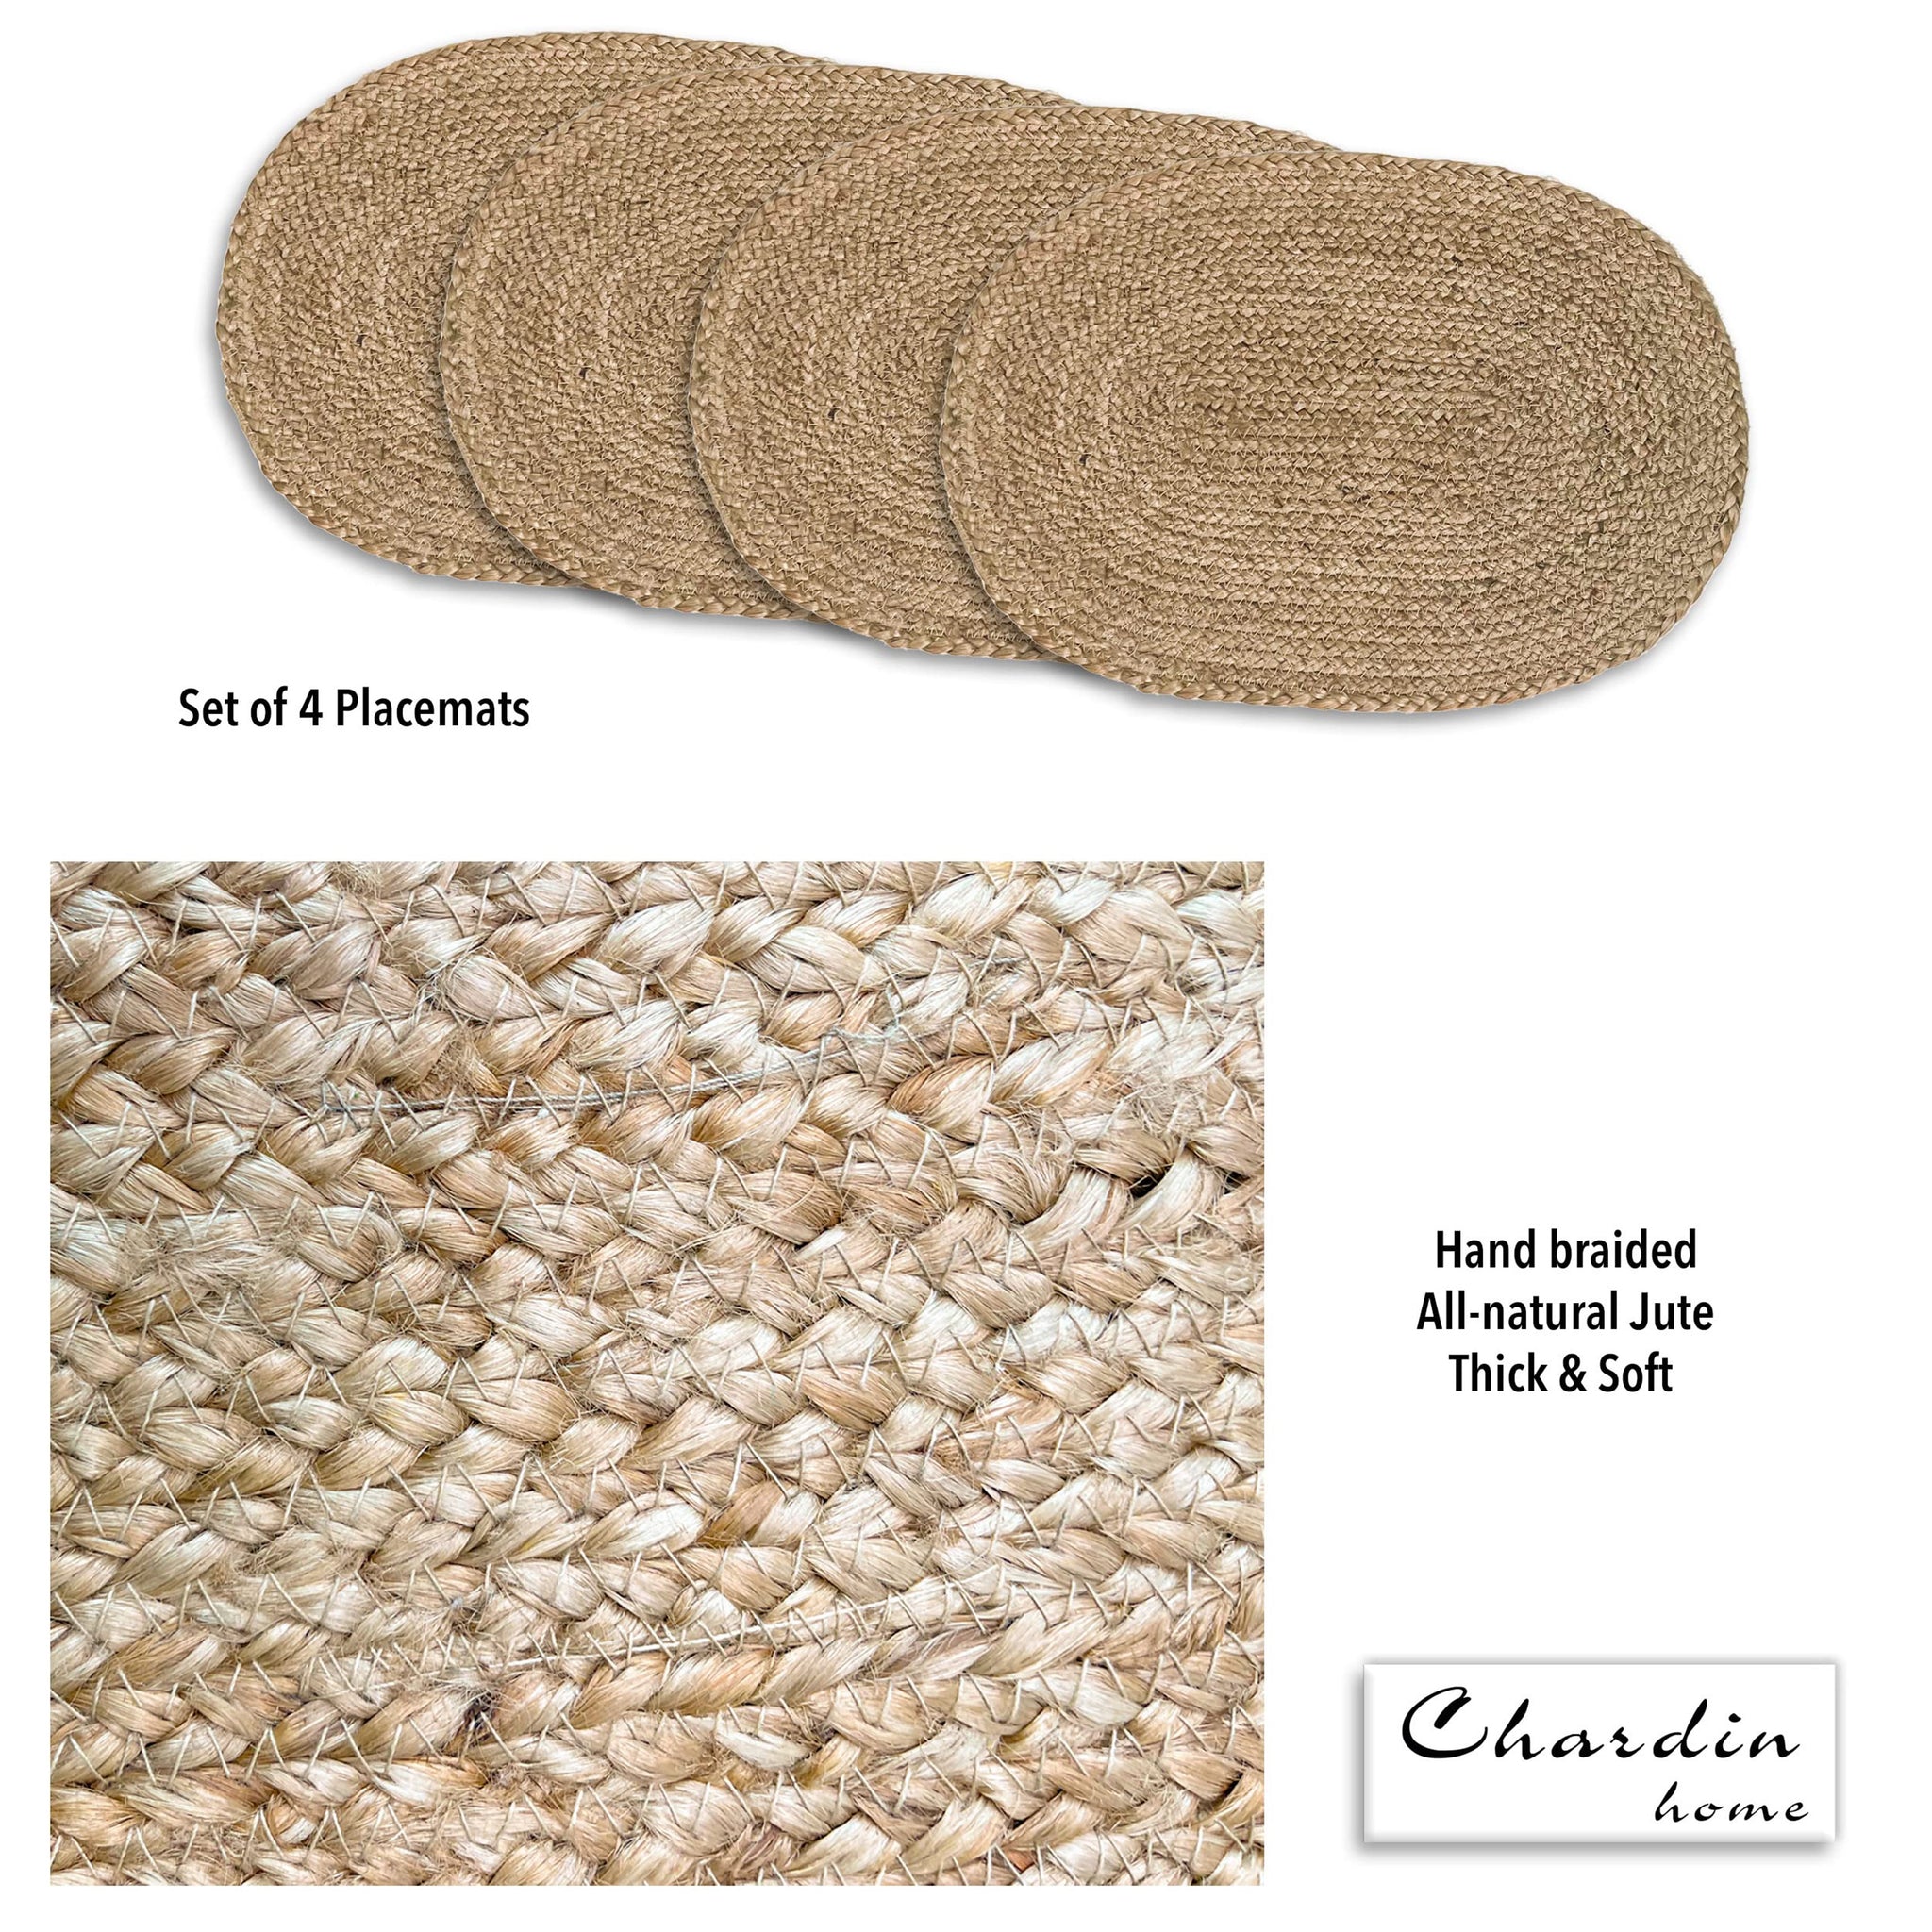  Chardin home Farmhouse Jute Braid Oval Rug, Perfect as  Doormat, Great for Porch, Kitchen, Meditation mat, Study, dorms